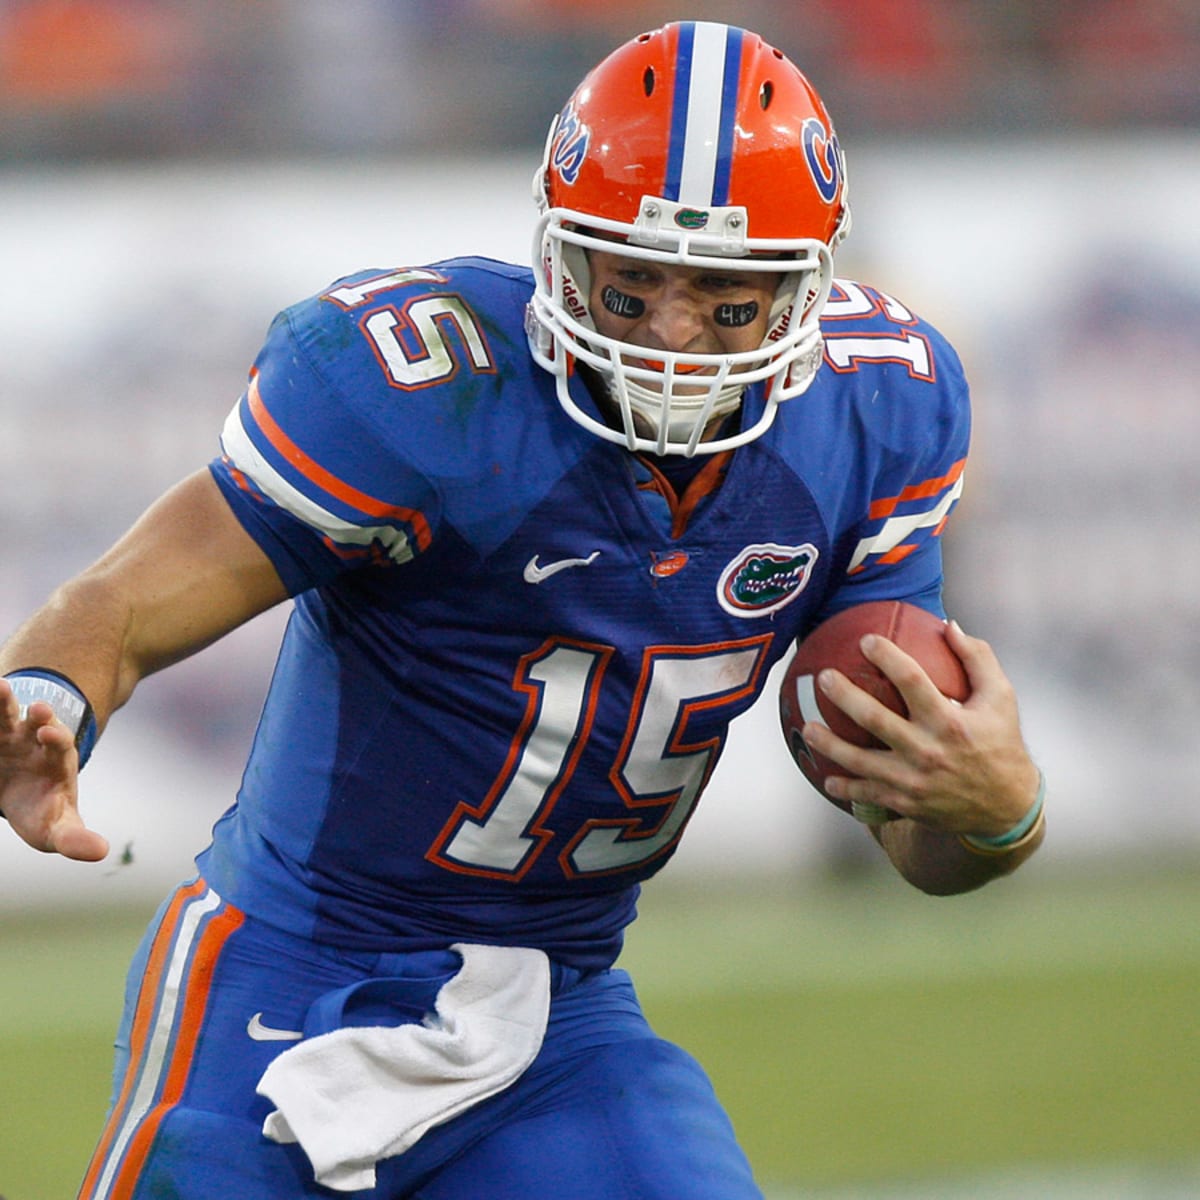 ESPN Ranks Tim Tebow as the No. 76 College Football Player of All